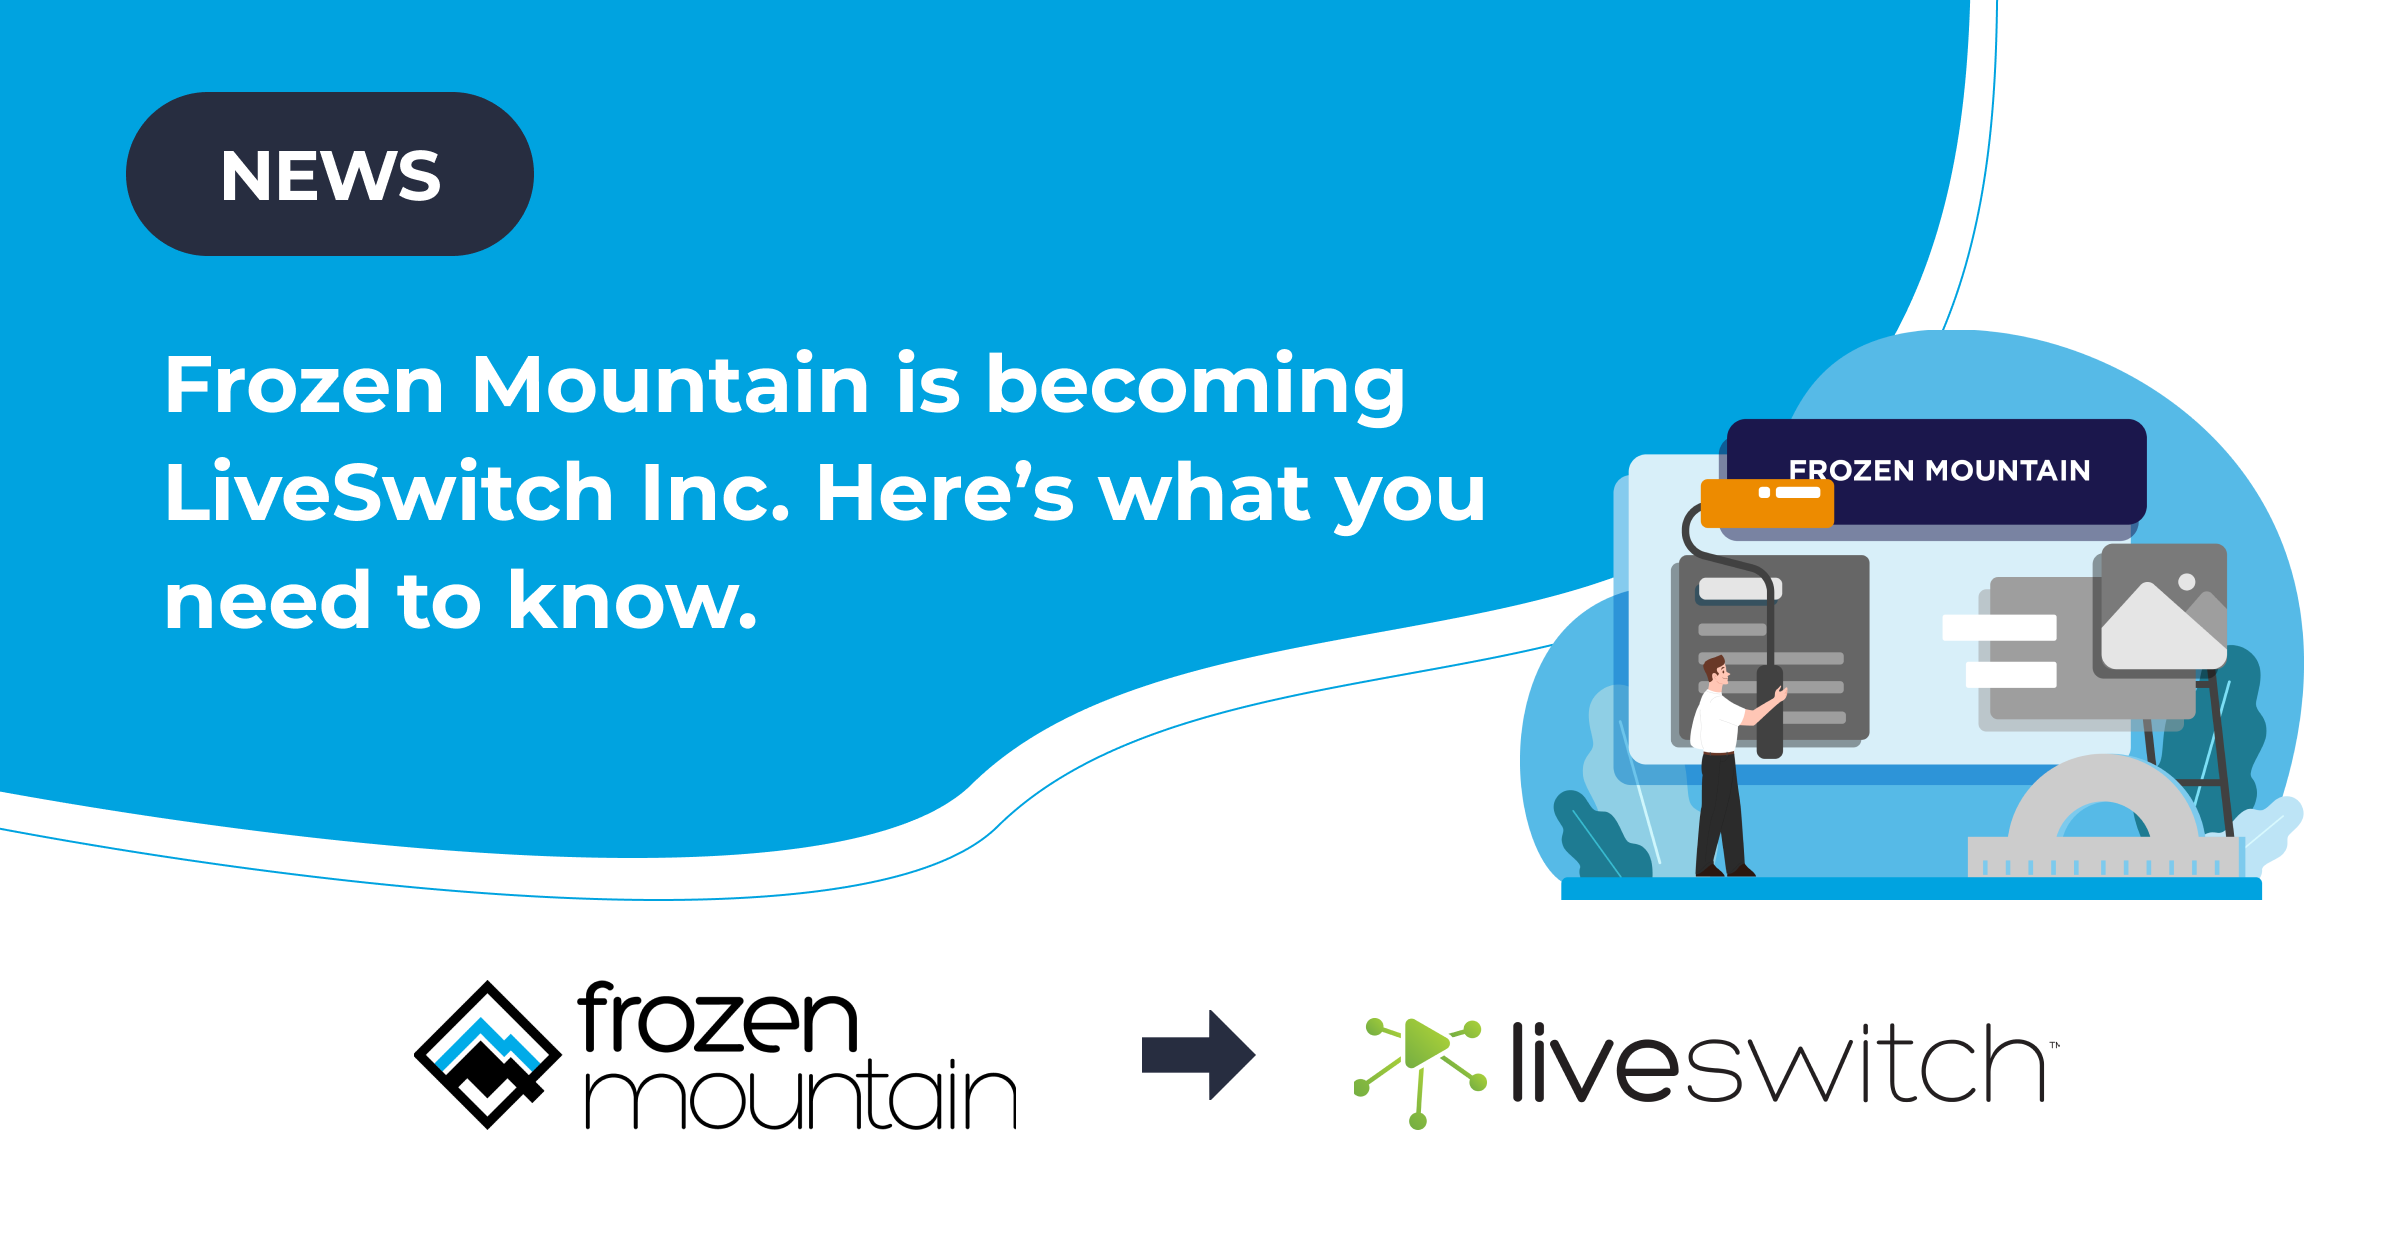 Frozen Mountain is becoming LiveSwitch Inc. Here’s what you need to know.